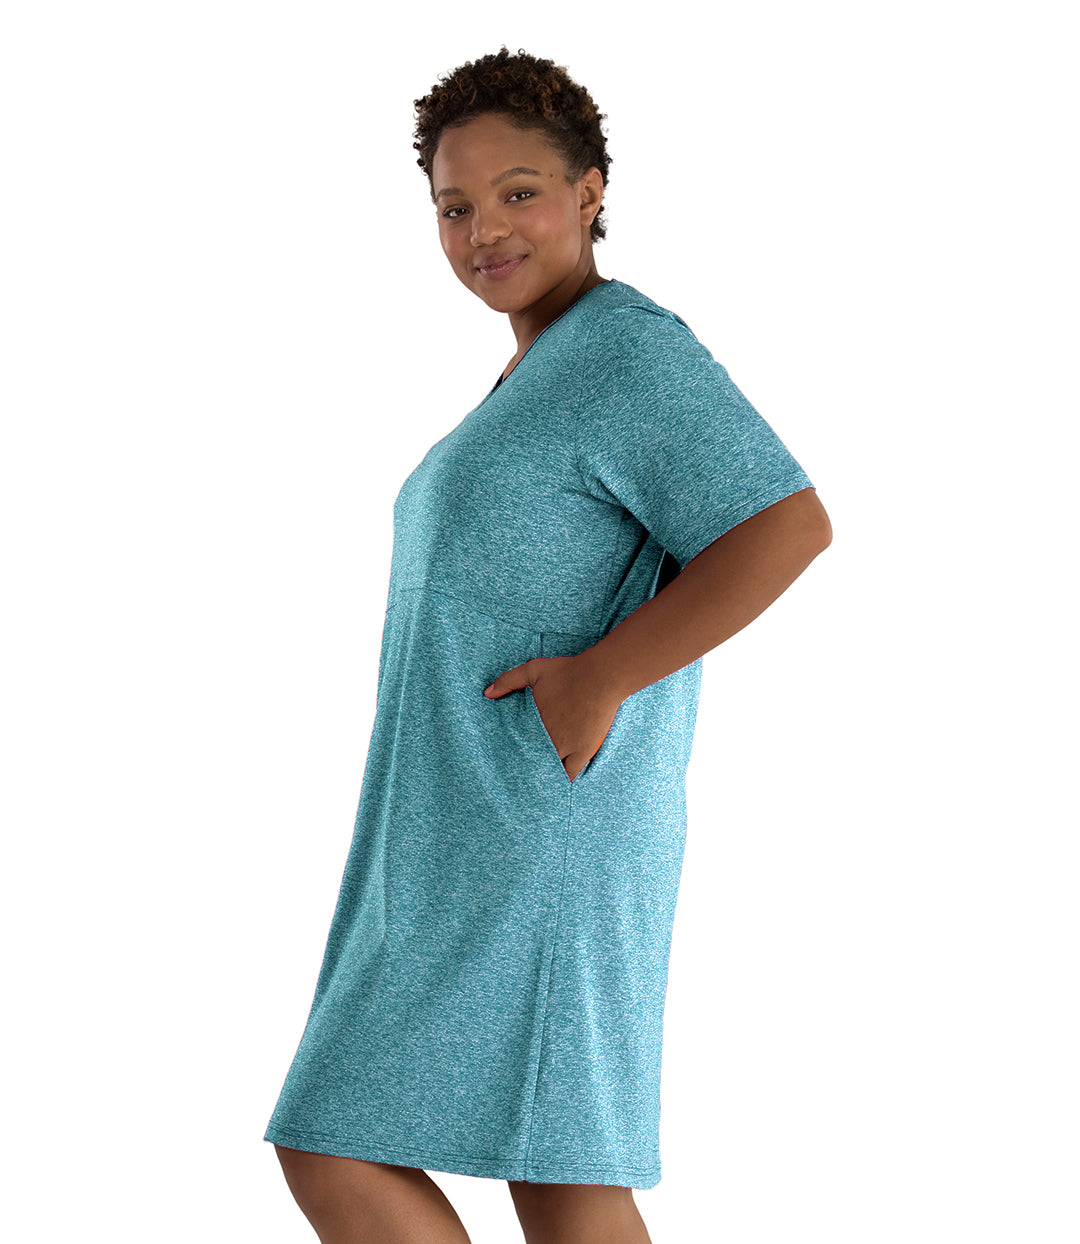 Plus size woman, facing left and looking front, wearing JunoActive plus size SoftWik Short Sleeve Dress in the color Heather Ocean. Her left hand is in the dress pocket. The dress length hits at her knee.